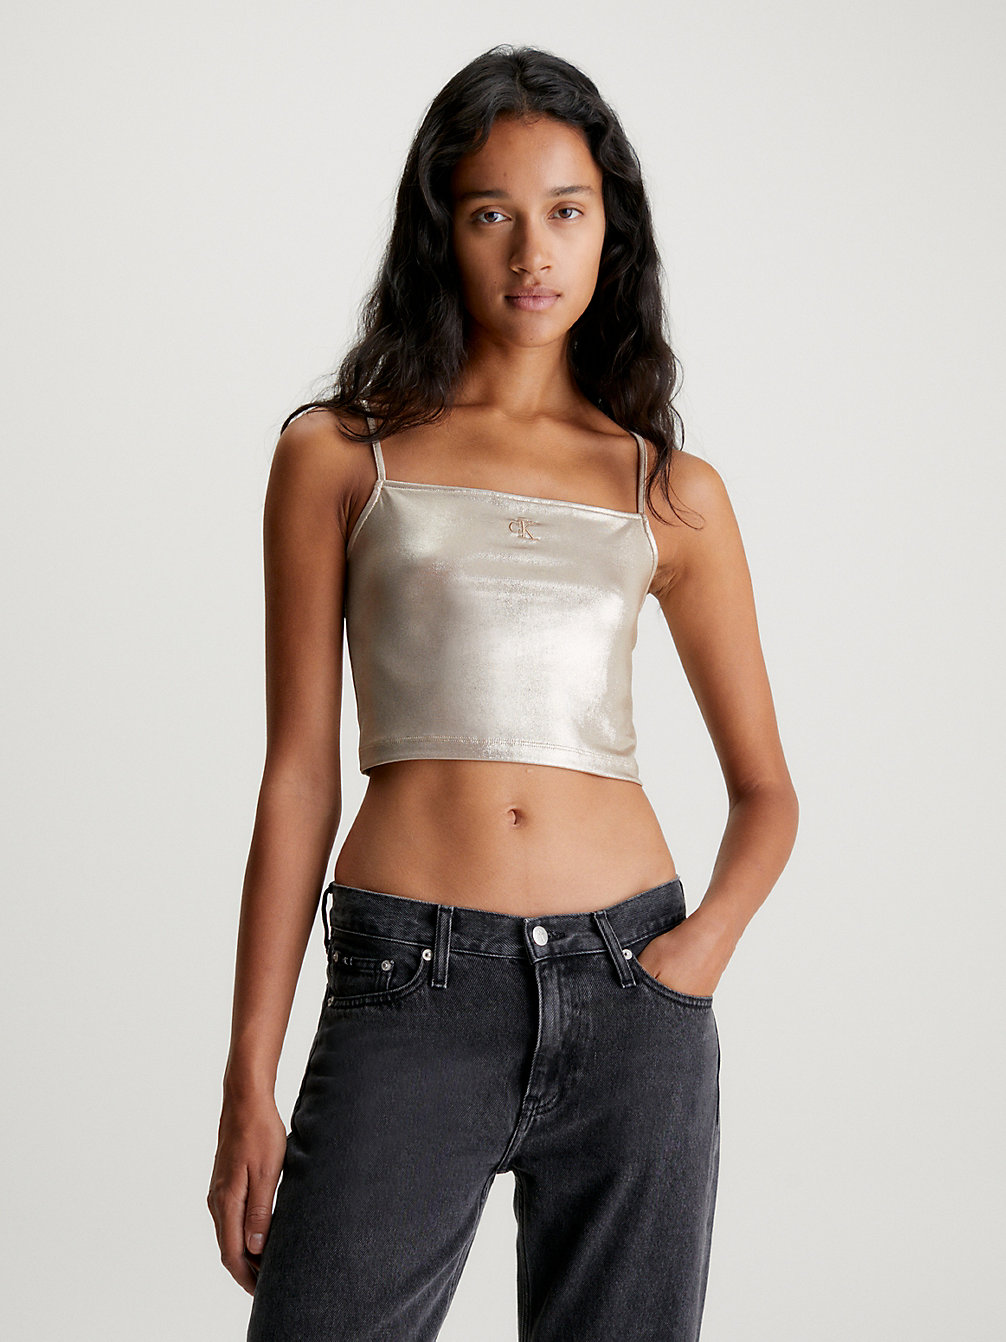 FROSTED ALMOND Cropped Metallic Tank Top undefined women Calvin Klein